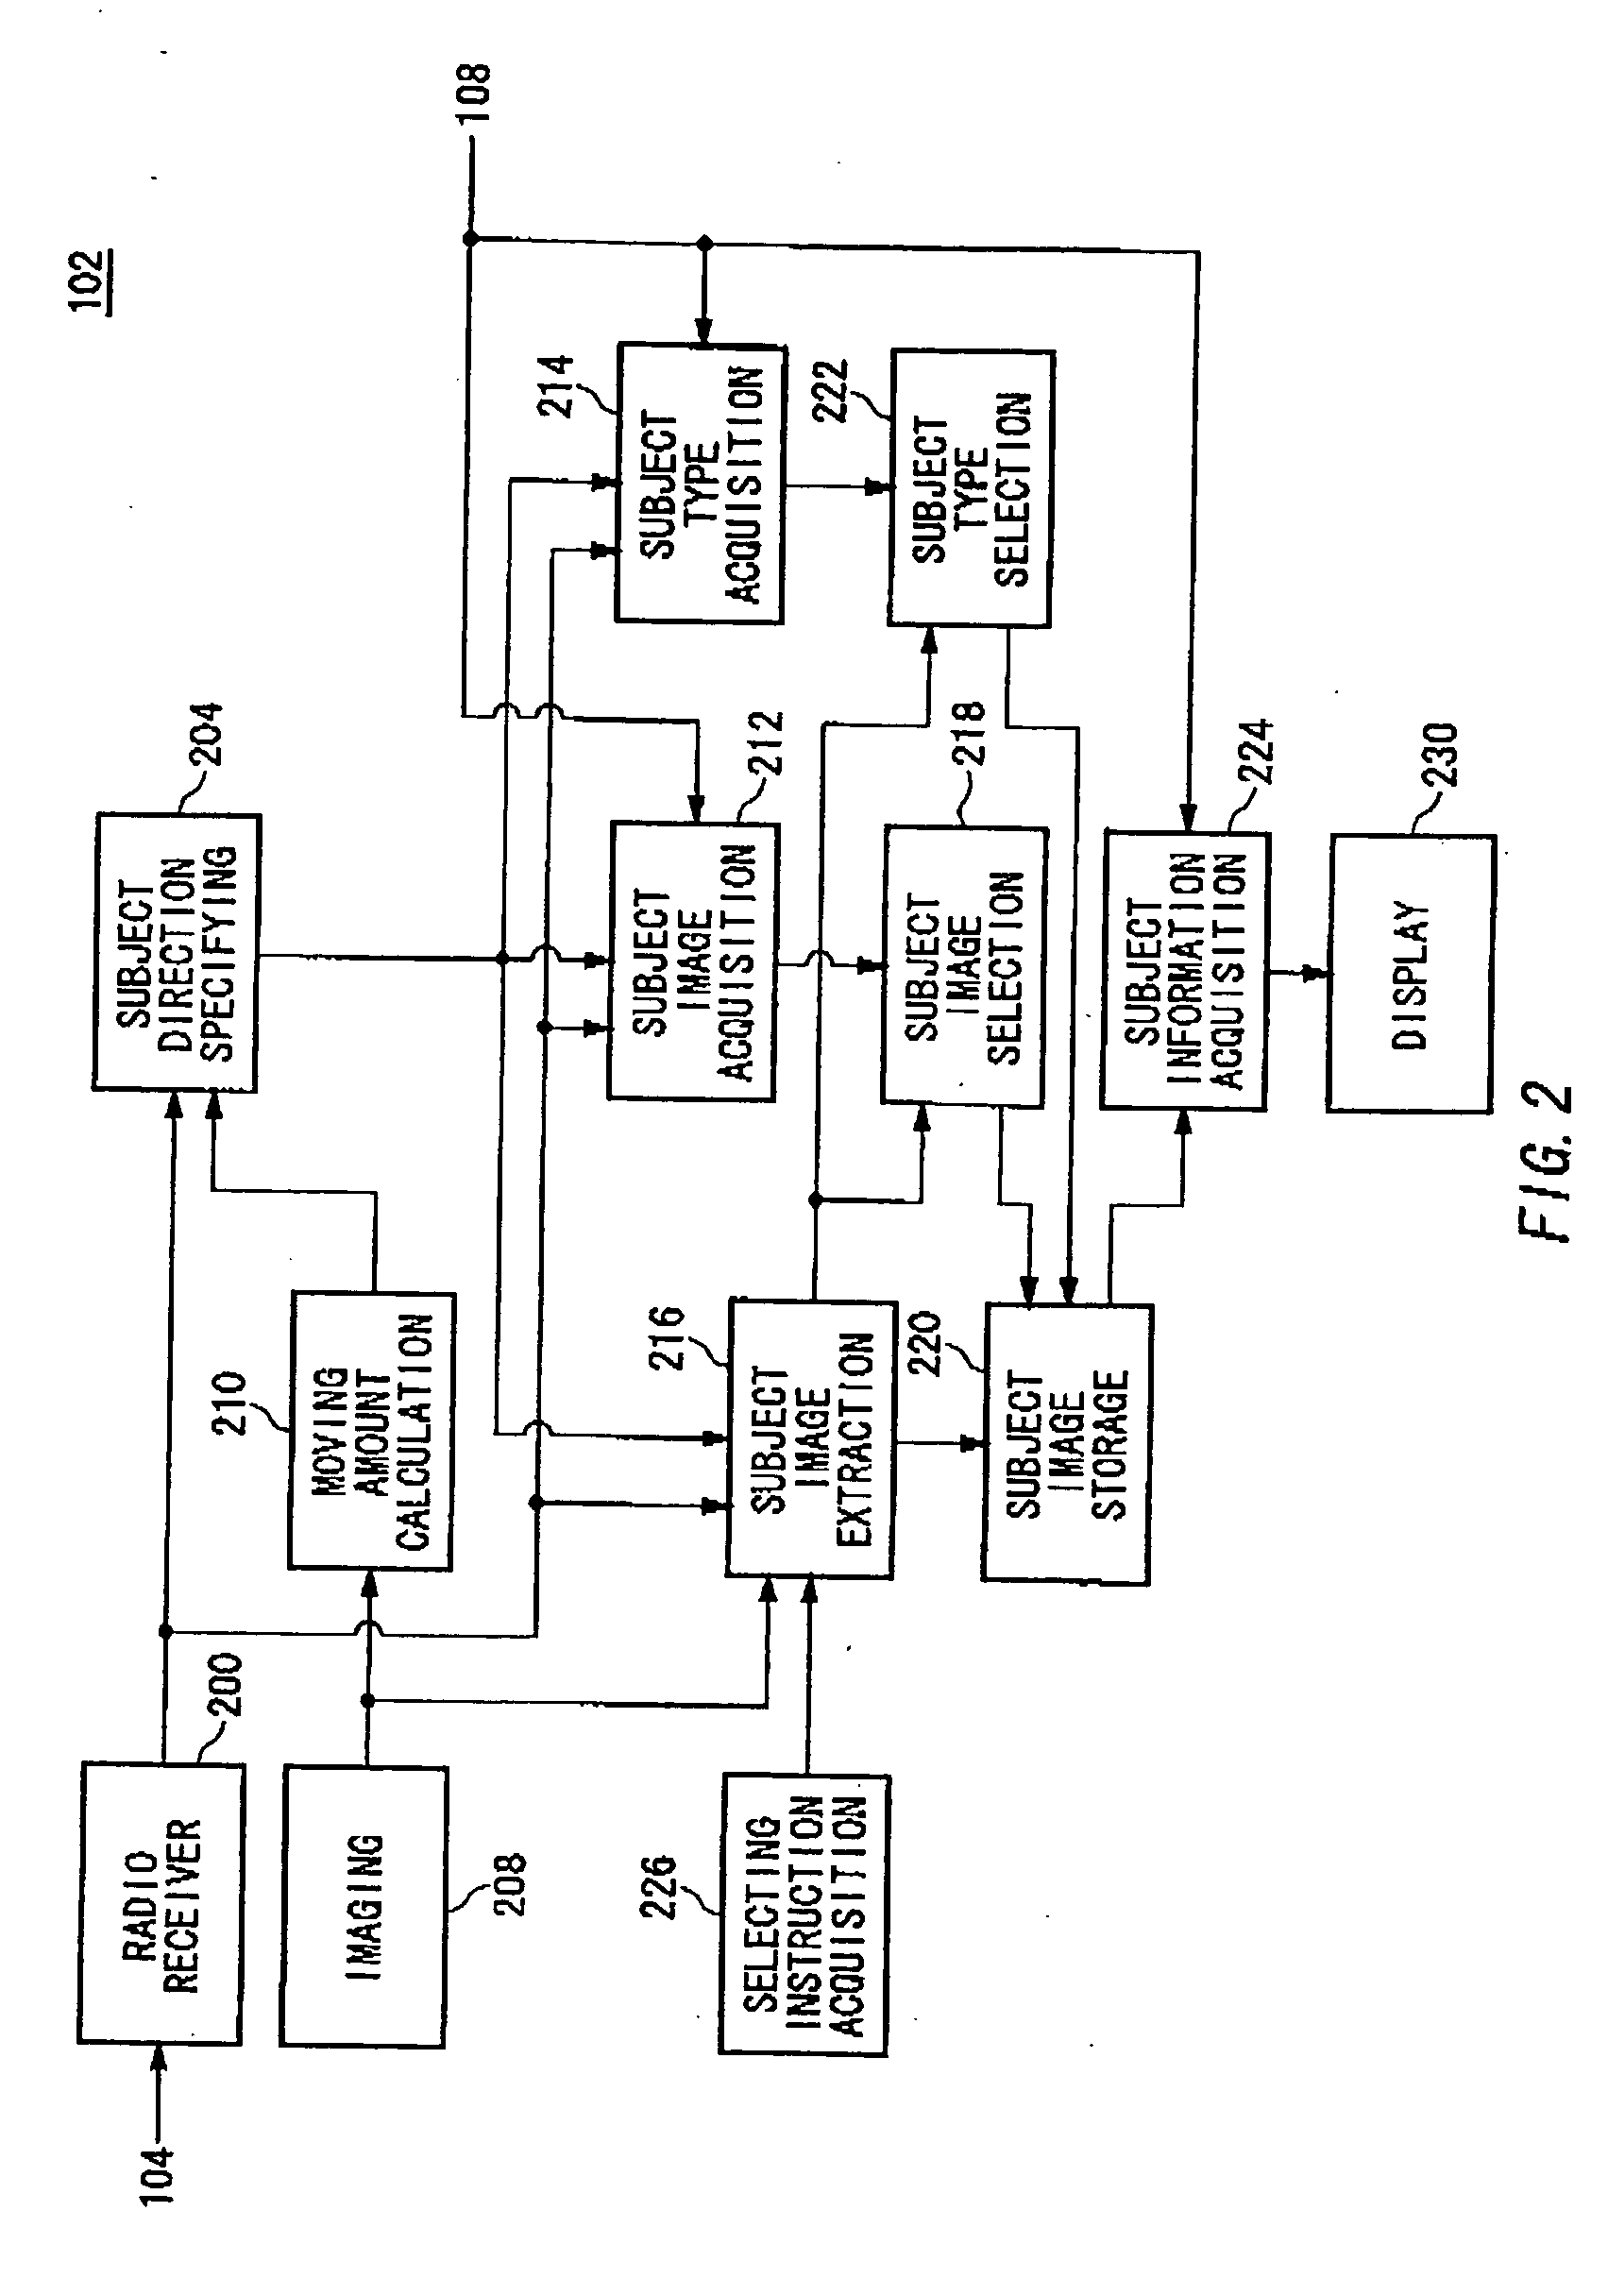 Imaging device, information storage server, article identification apparatus and imaging system